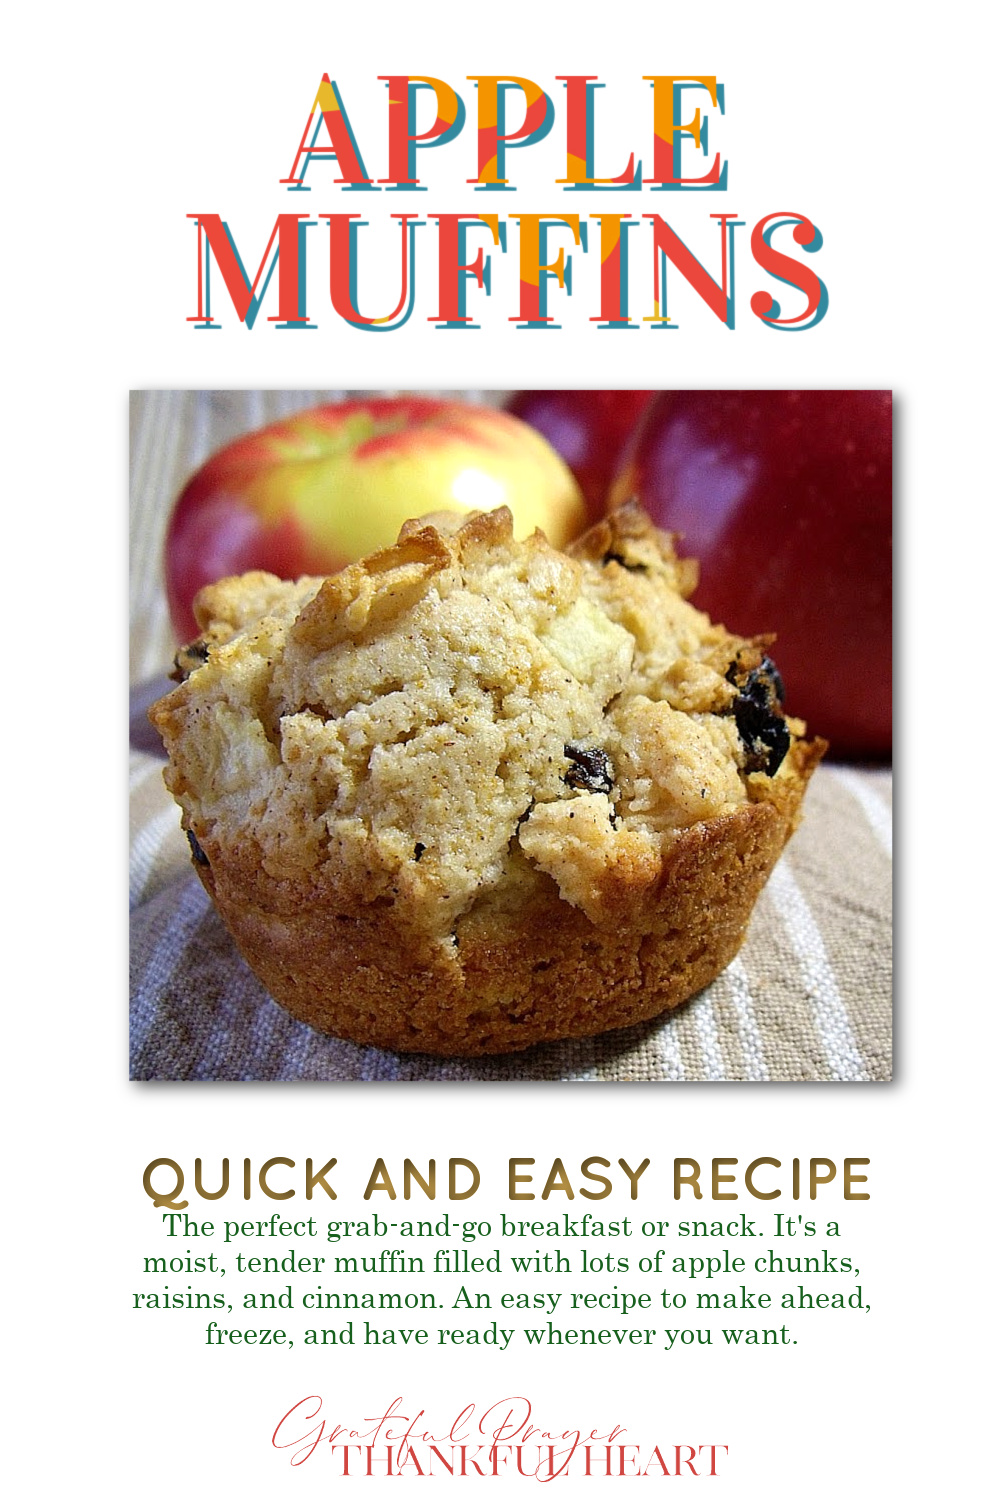 A perfect grab-and-go breakfast or snack, moist, tender muffins filled with apple, raisins, and cinnamon. Easy recipe to make ahead & freeze.